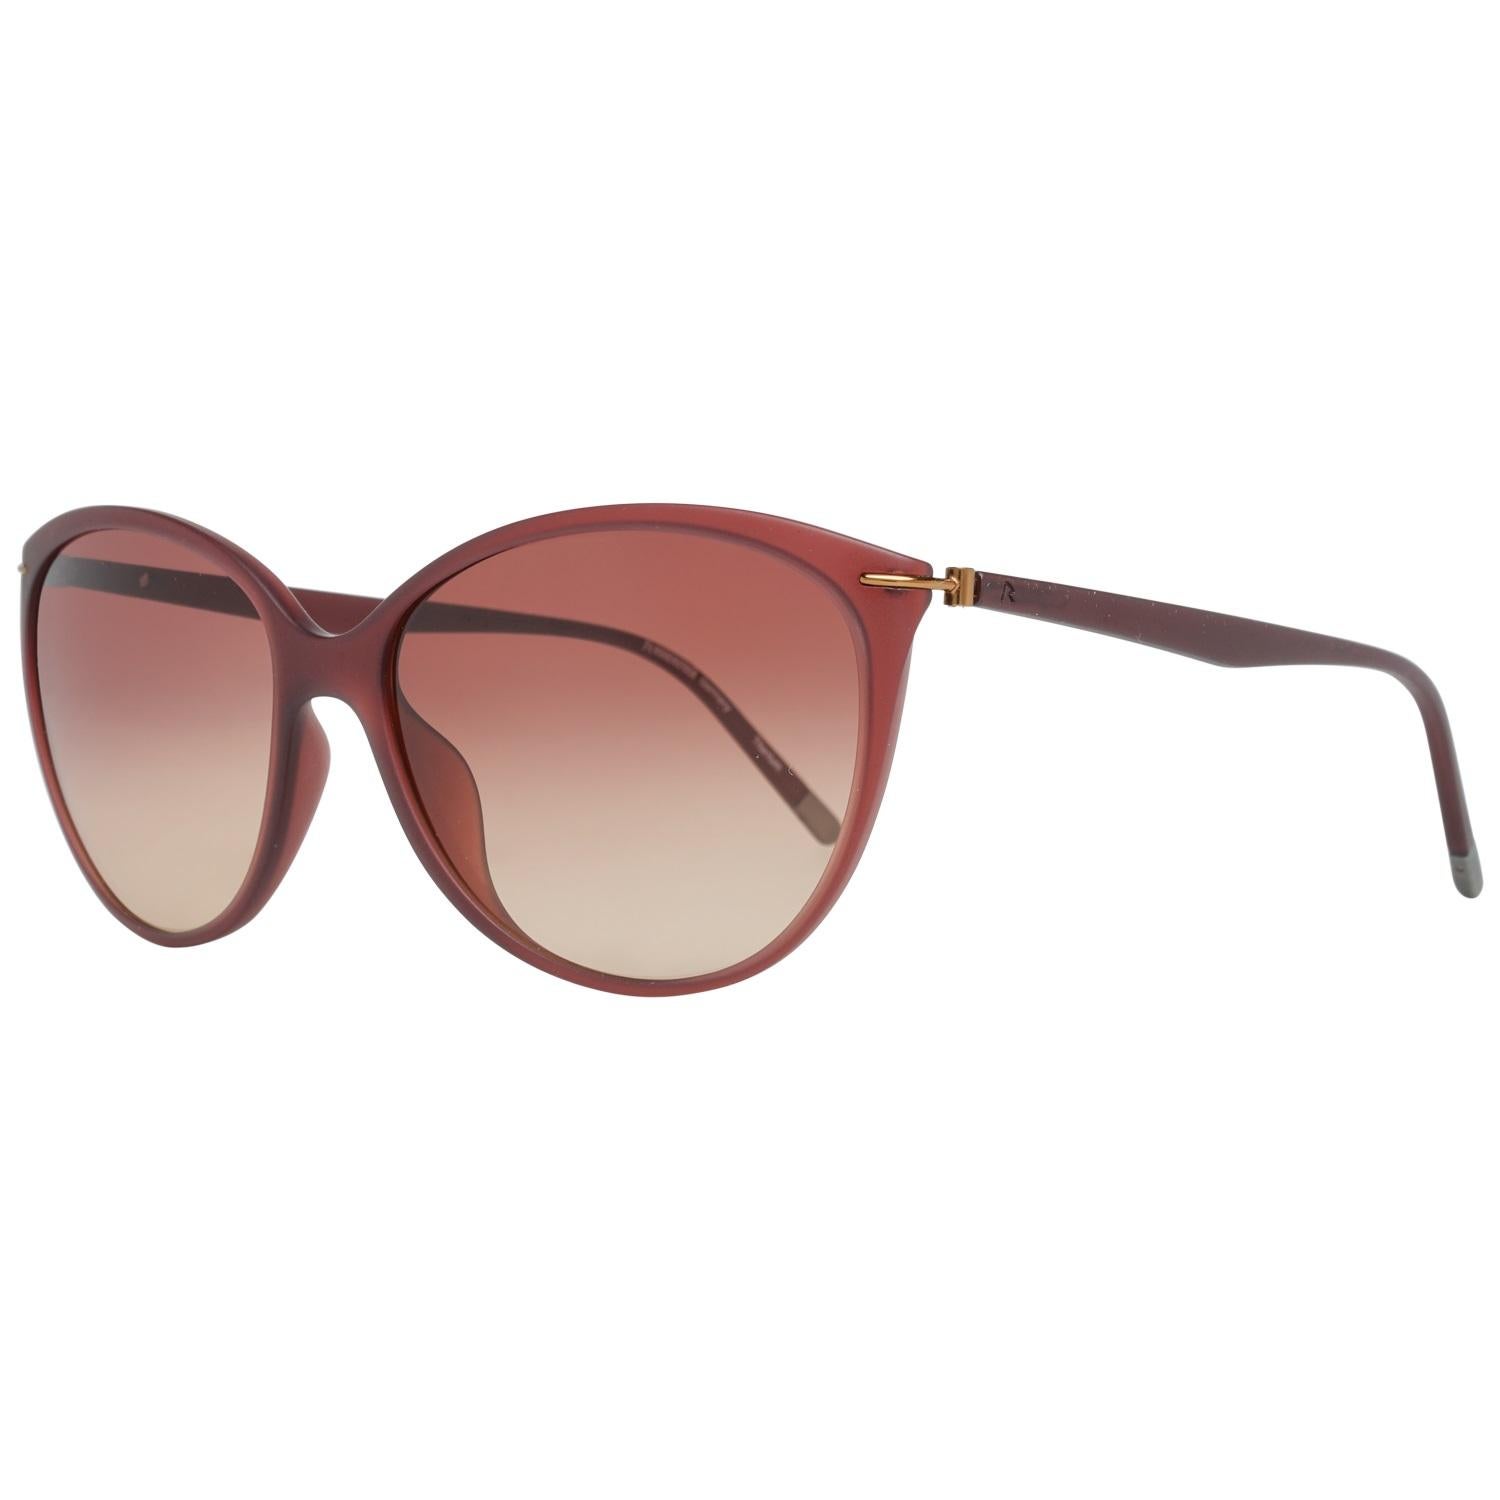 Details
MATERIAL: Titanium
COLOR: Red
MODEL: R7412 C 57
GENDER: Women
COUNTRY OF MANUFACTURE: China
TYPE: Sunglasses
ORIGINAL CASE?: Yes
STYLE: Oval
OCCASION: Casual
FEATURES: Lightweight
LENS COLOR: Multicolor
LENS TECHNOLOGY: Gradient
YEAR